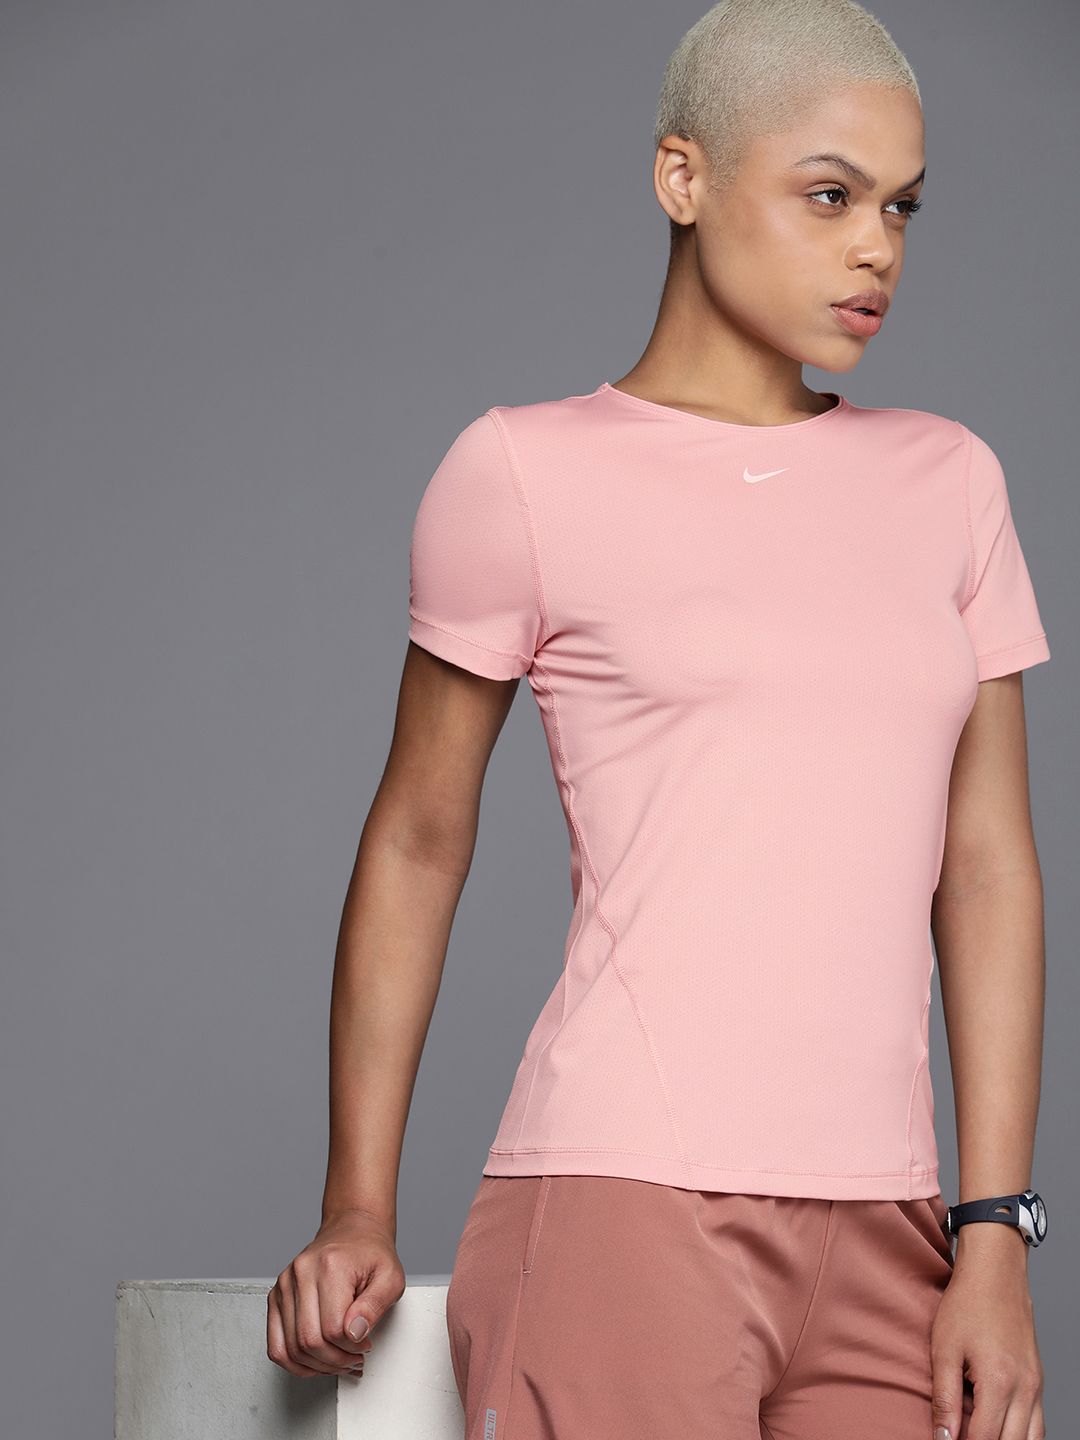 Nike Women Dri-FIT Over Mesh NP SS Training or Gym T-shirt Price in India